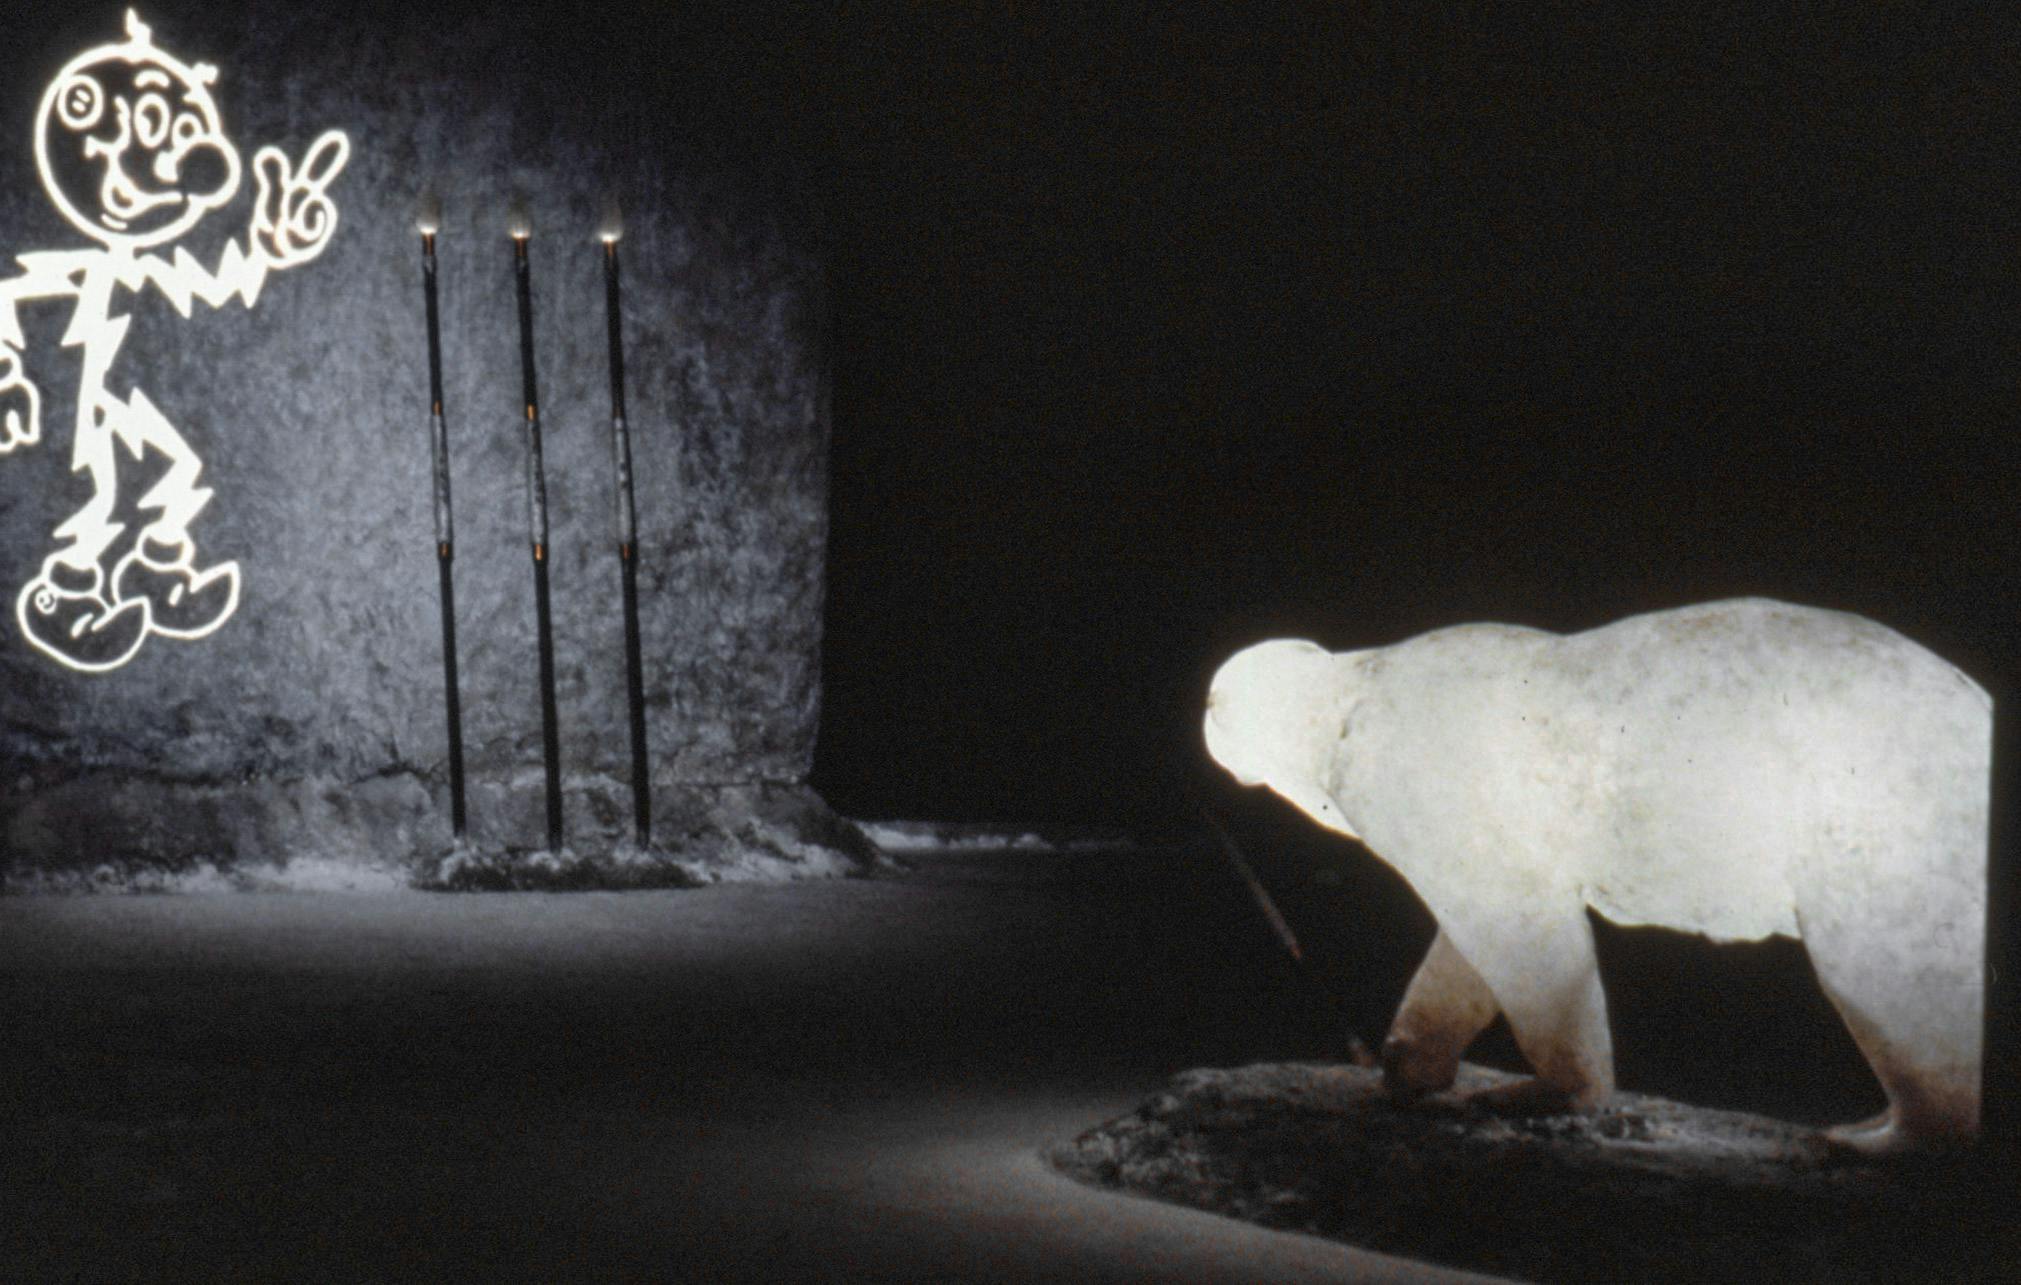 A polar bear sculpture in a dark room is placed to appear to be walking towards a faw stone wall. The wall has a glowing, smiling cartoonish character on it, as well as 3 large spears resting on it. 